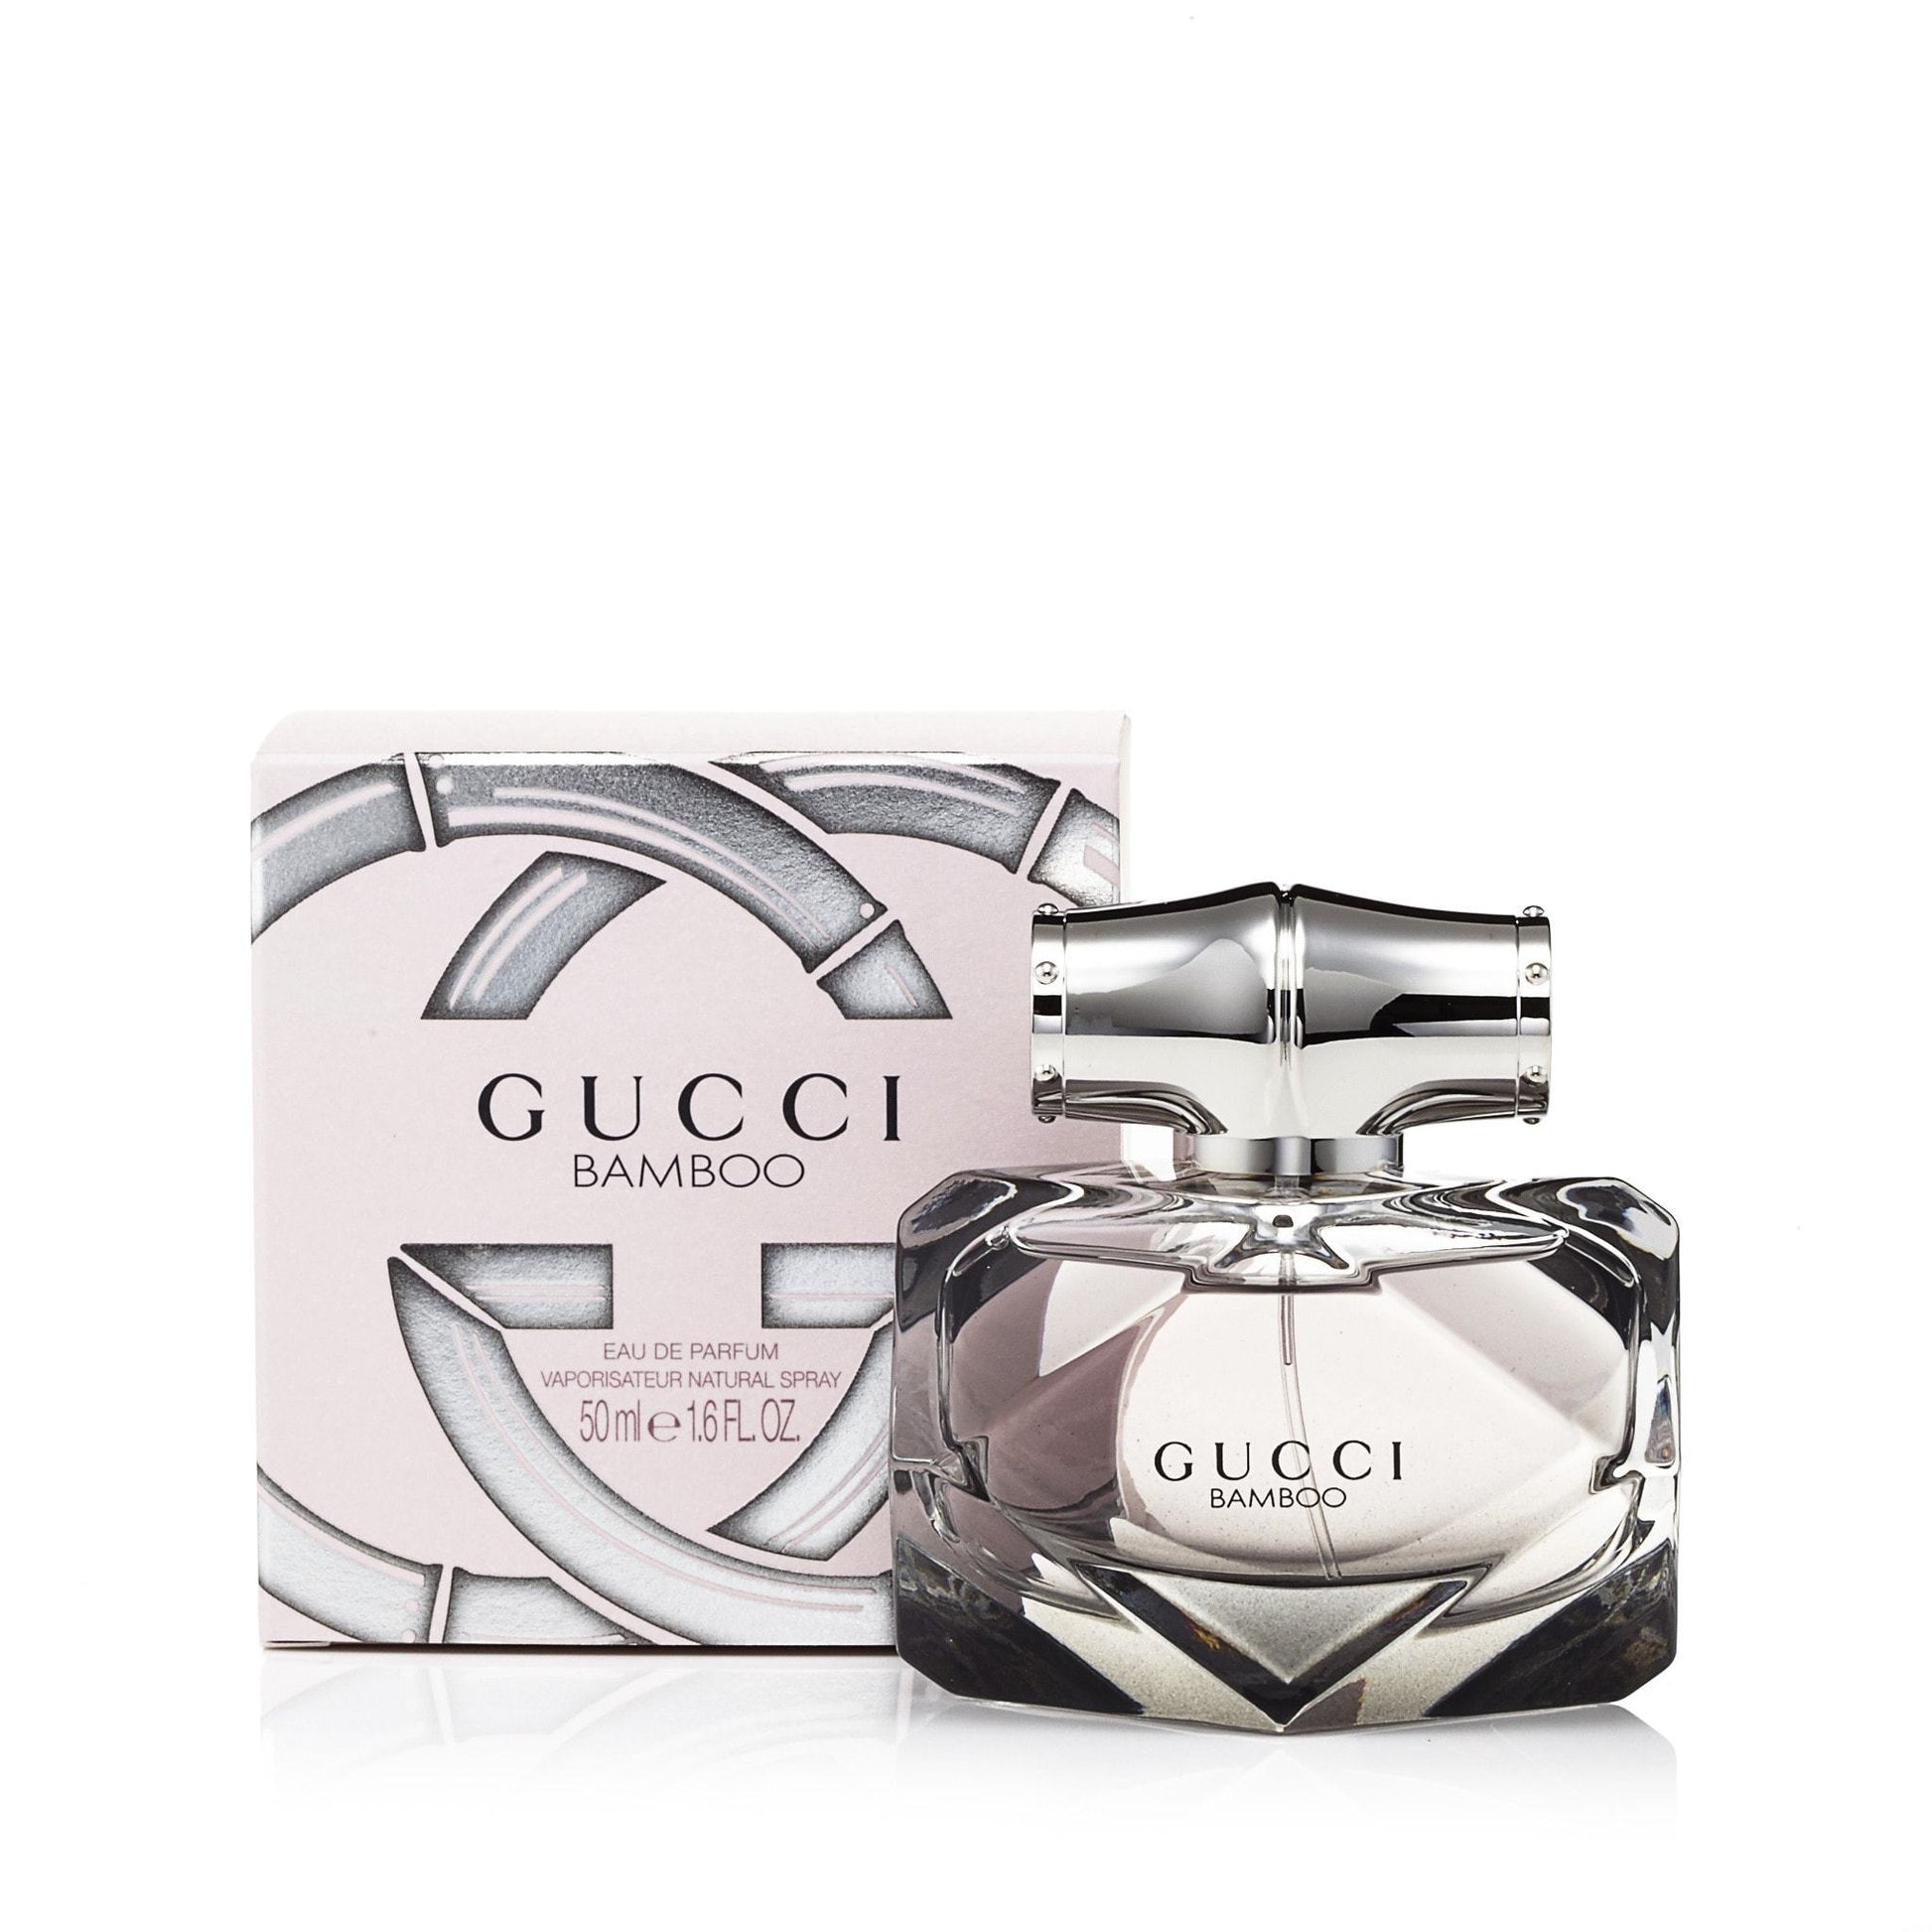 Bamboo Eau de Parfum Spray for Women by Gucci, Product image 5